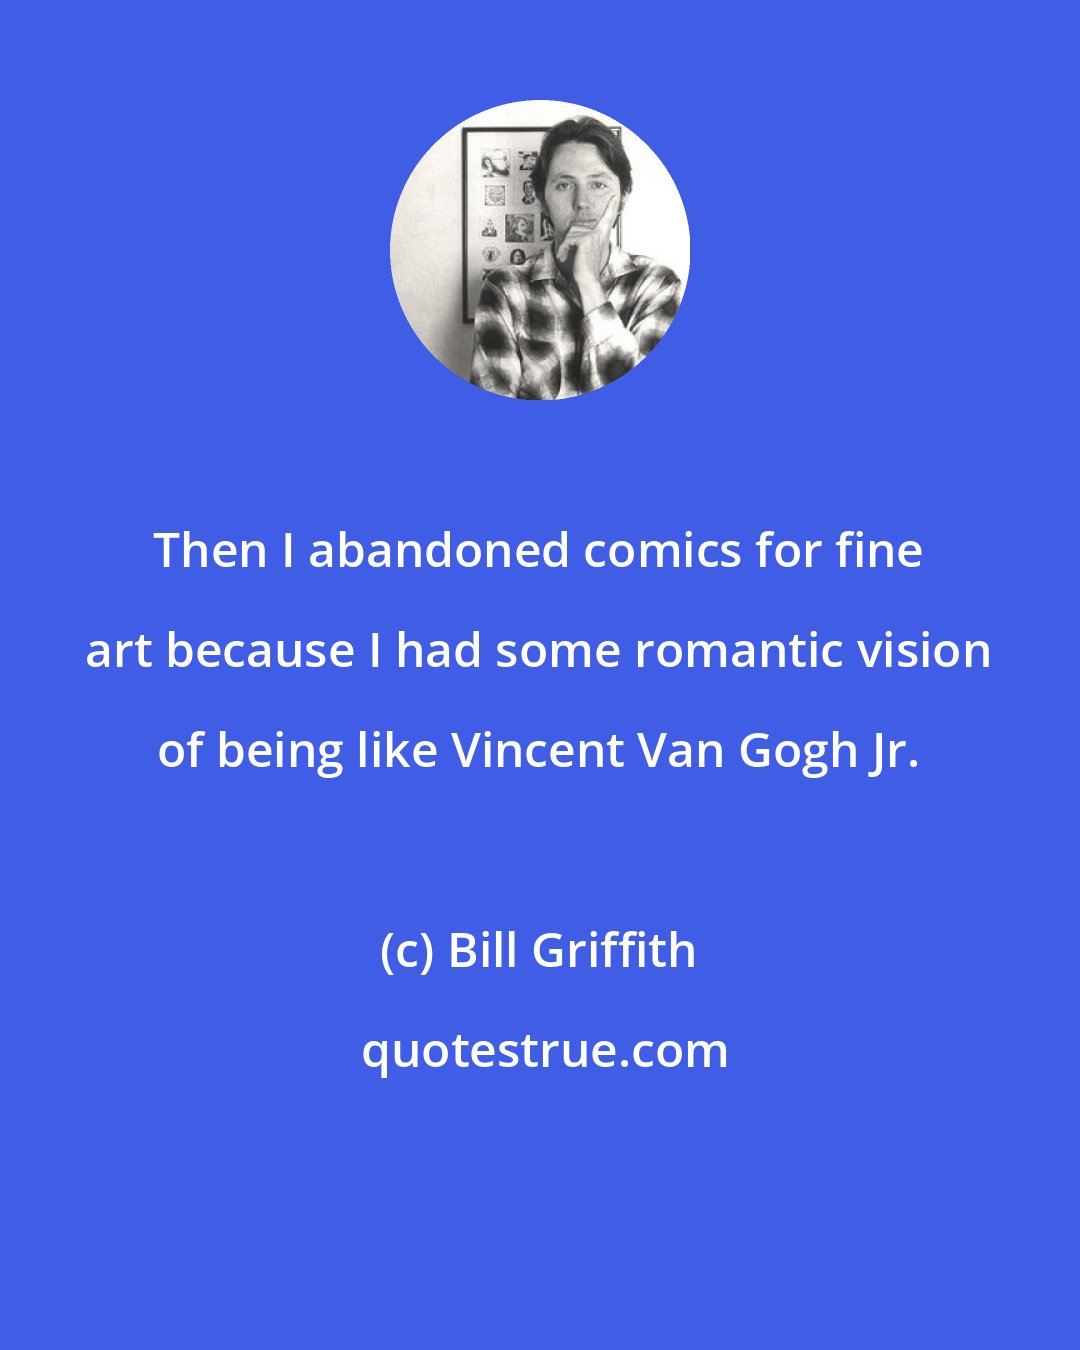 Bill Griffith: Then I abandoned comics for fine art because I had some romantic vision of being like Vincent Van Gogh Jr.